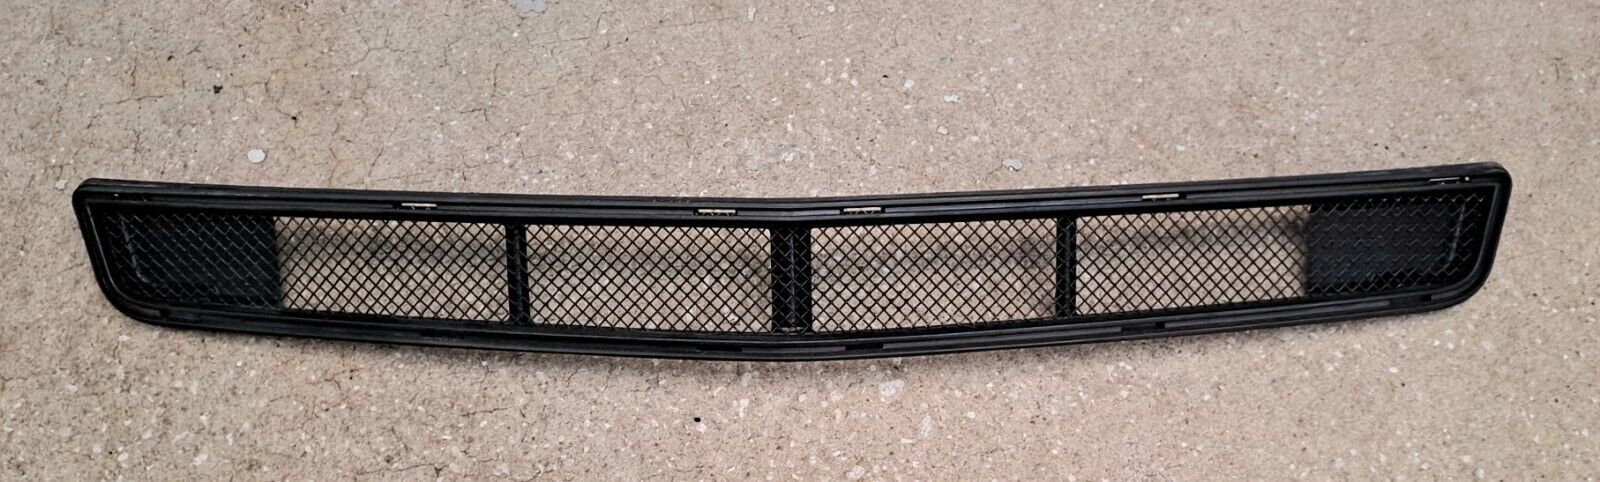 2005-2007 Cadillac STS Lower Bumper Mesh Grille Insert Black 2006 